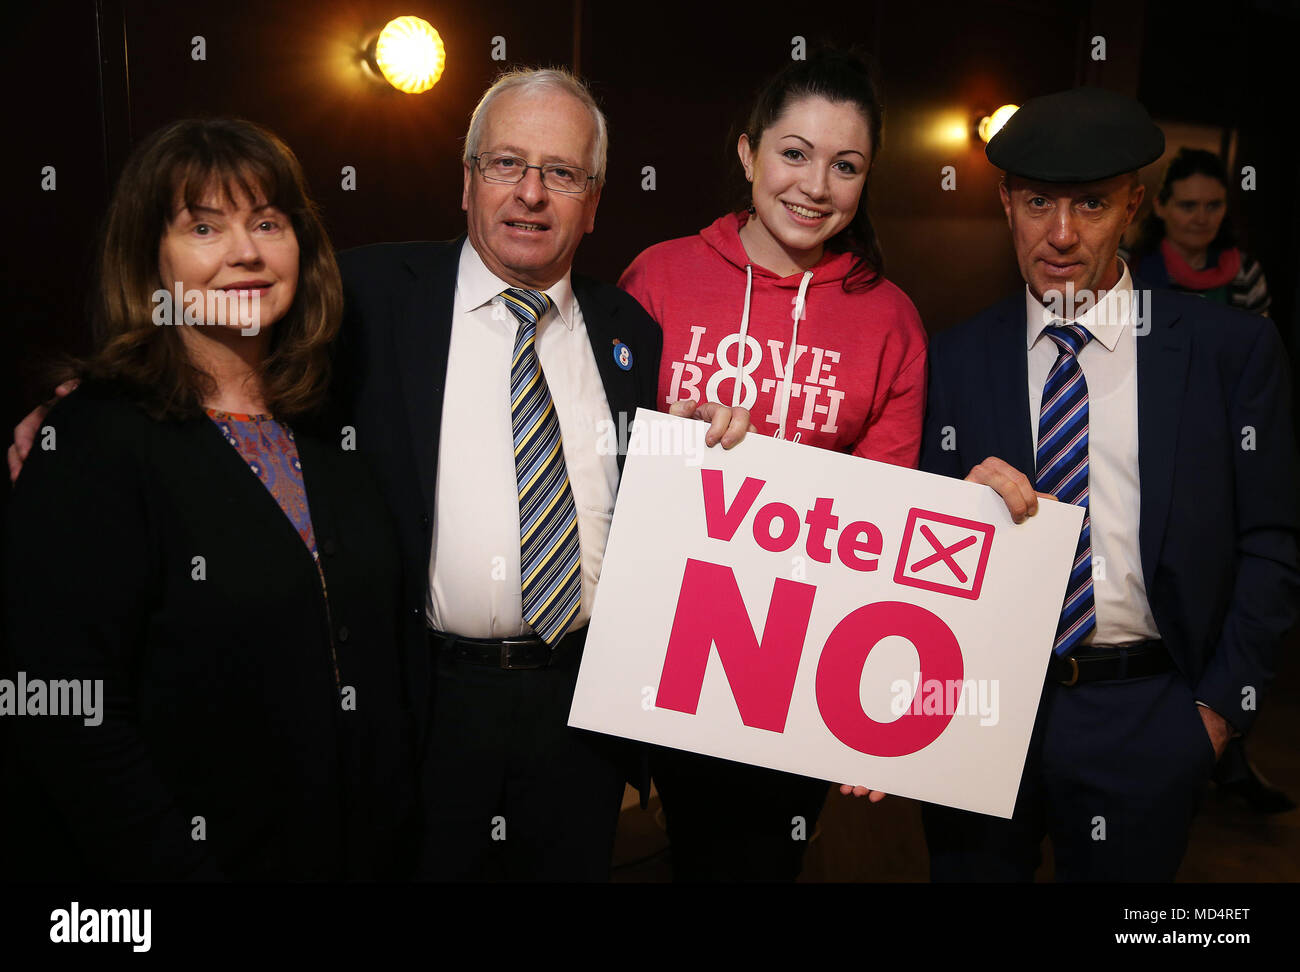 Legal consultant Caroline Simons (left) with TD's Mattie McGrath and Michael Healy Rae (right) and campaigner Brigit Hirsch at the launch of the LoveBoth "Vote No" campaign at The Alex Hotel, Dublin, ahead of the referendum on the Eighth Amendment on May 25. Stock Photo